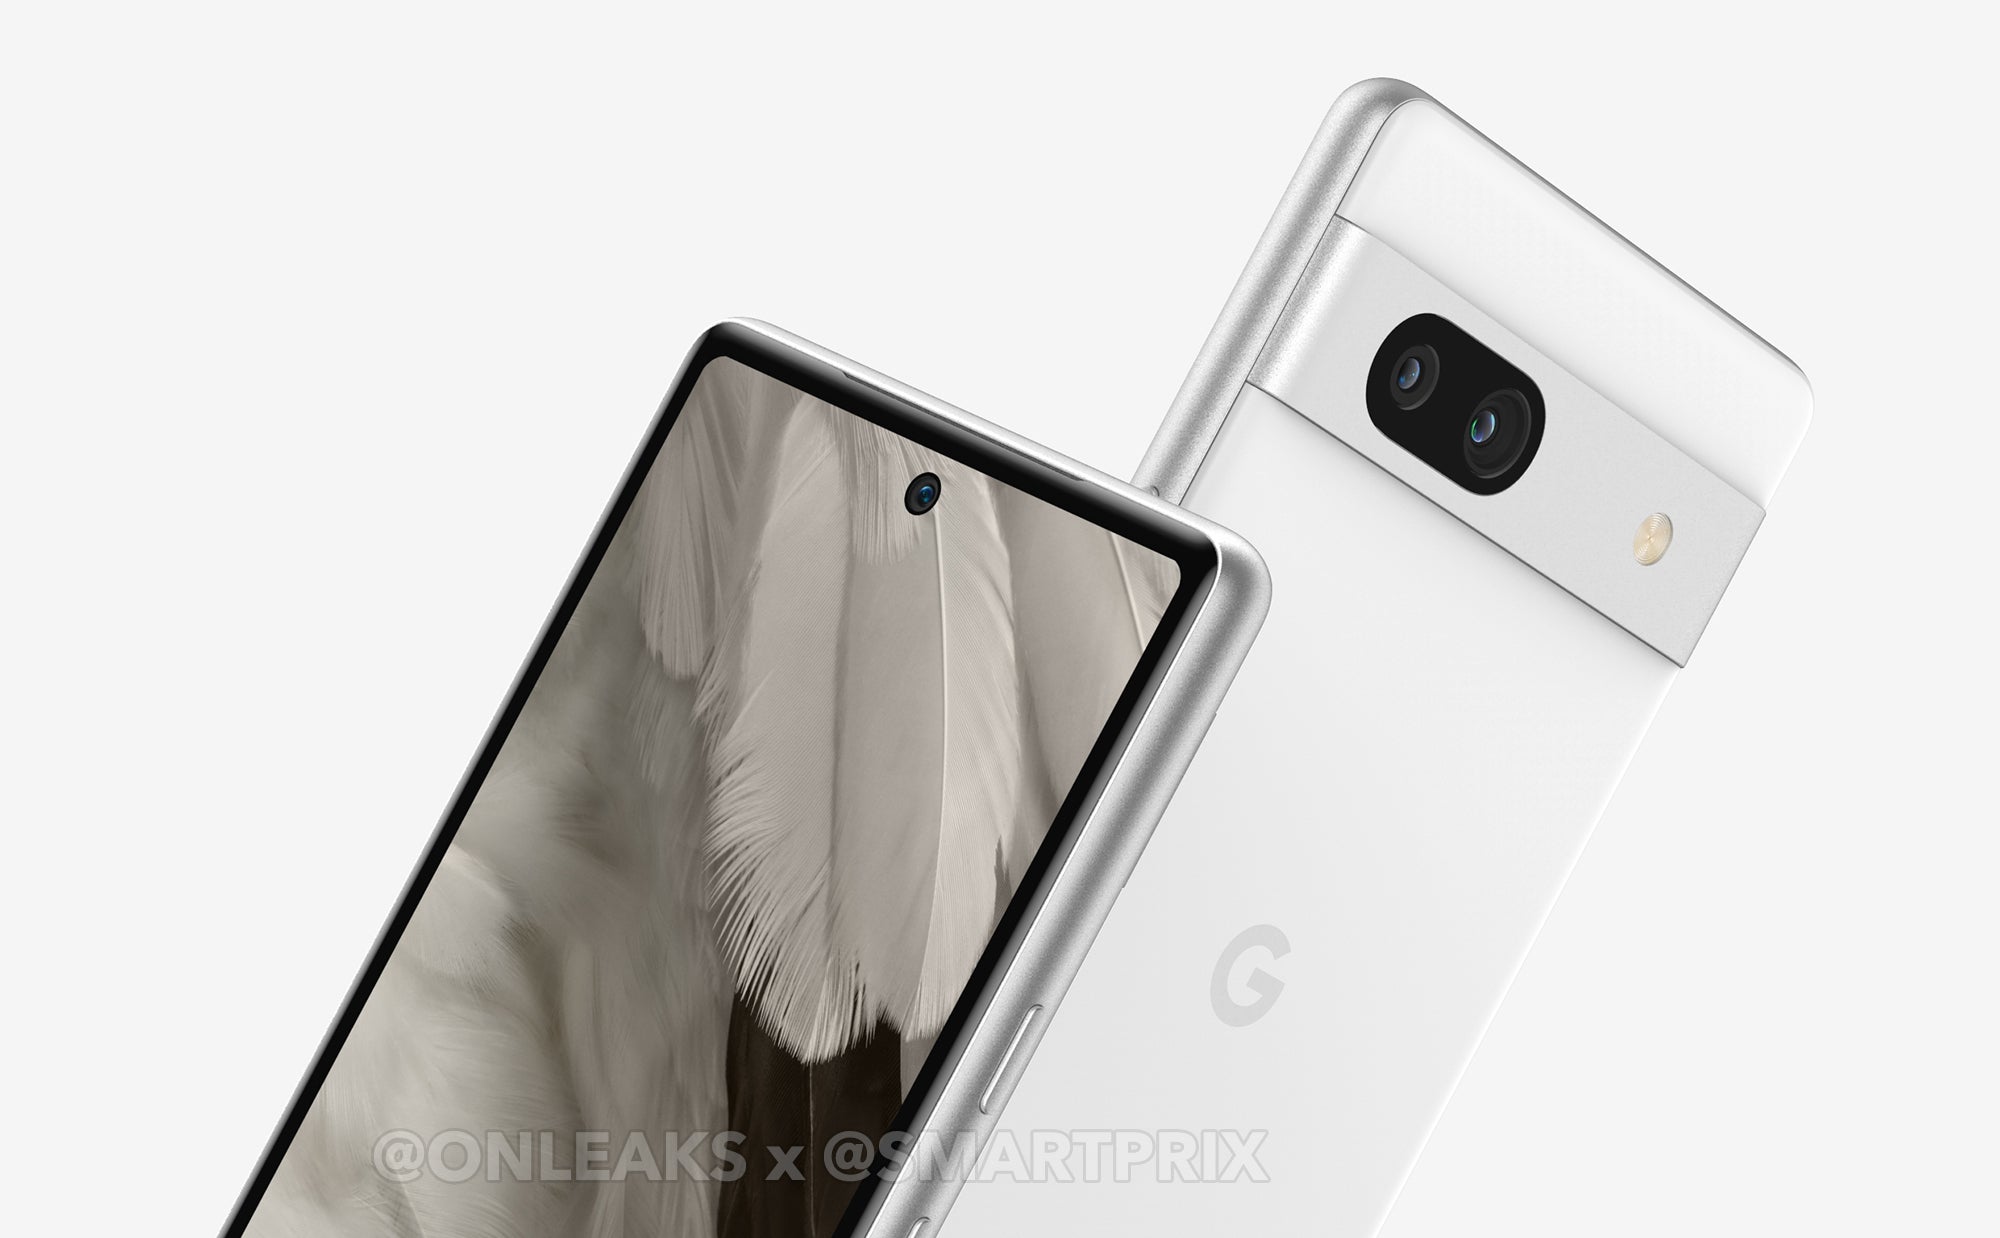 Pixel 7a render - Here's our first look at Google's 2023 mid-ranger, the Pixel 7a